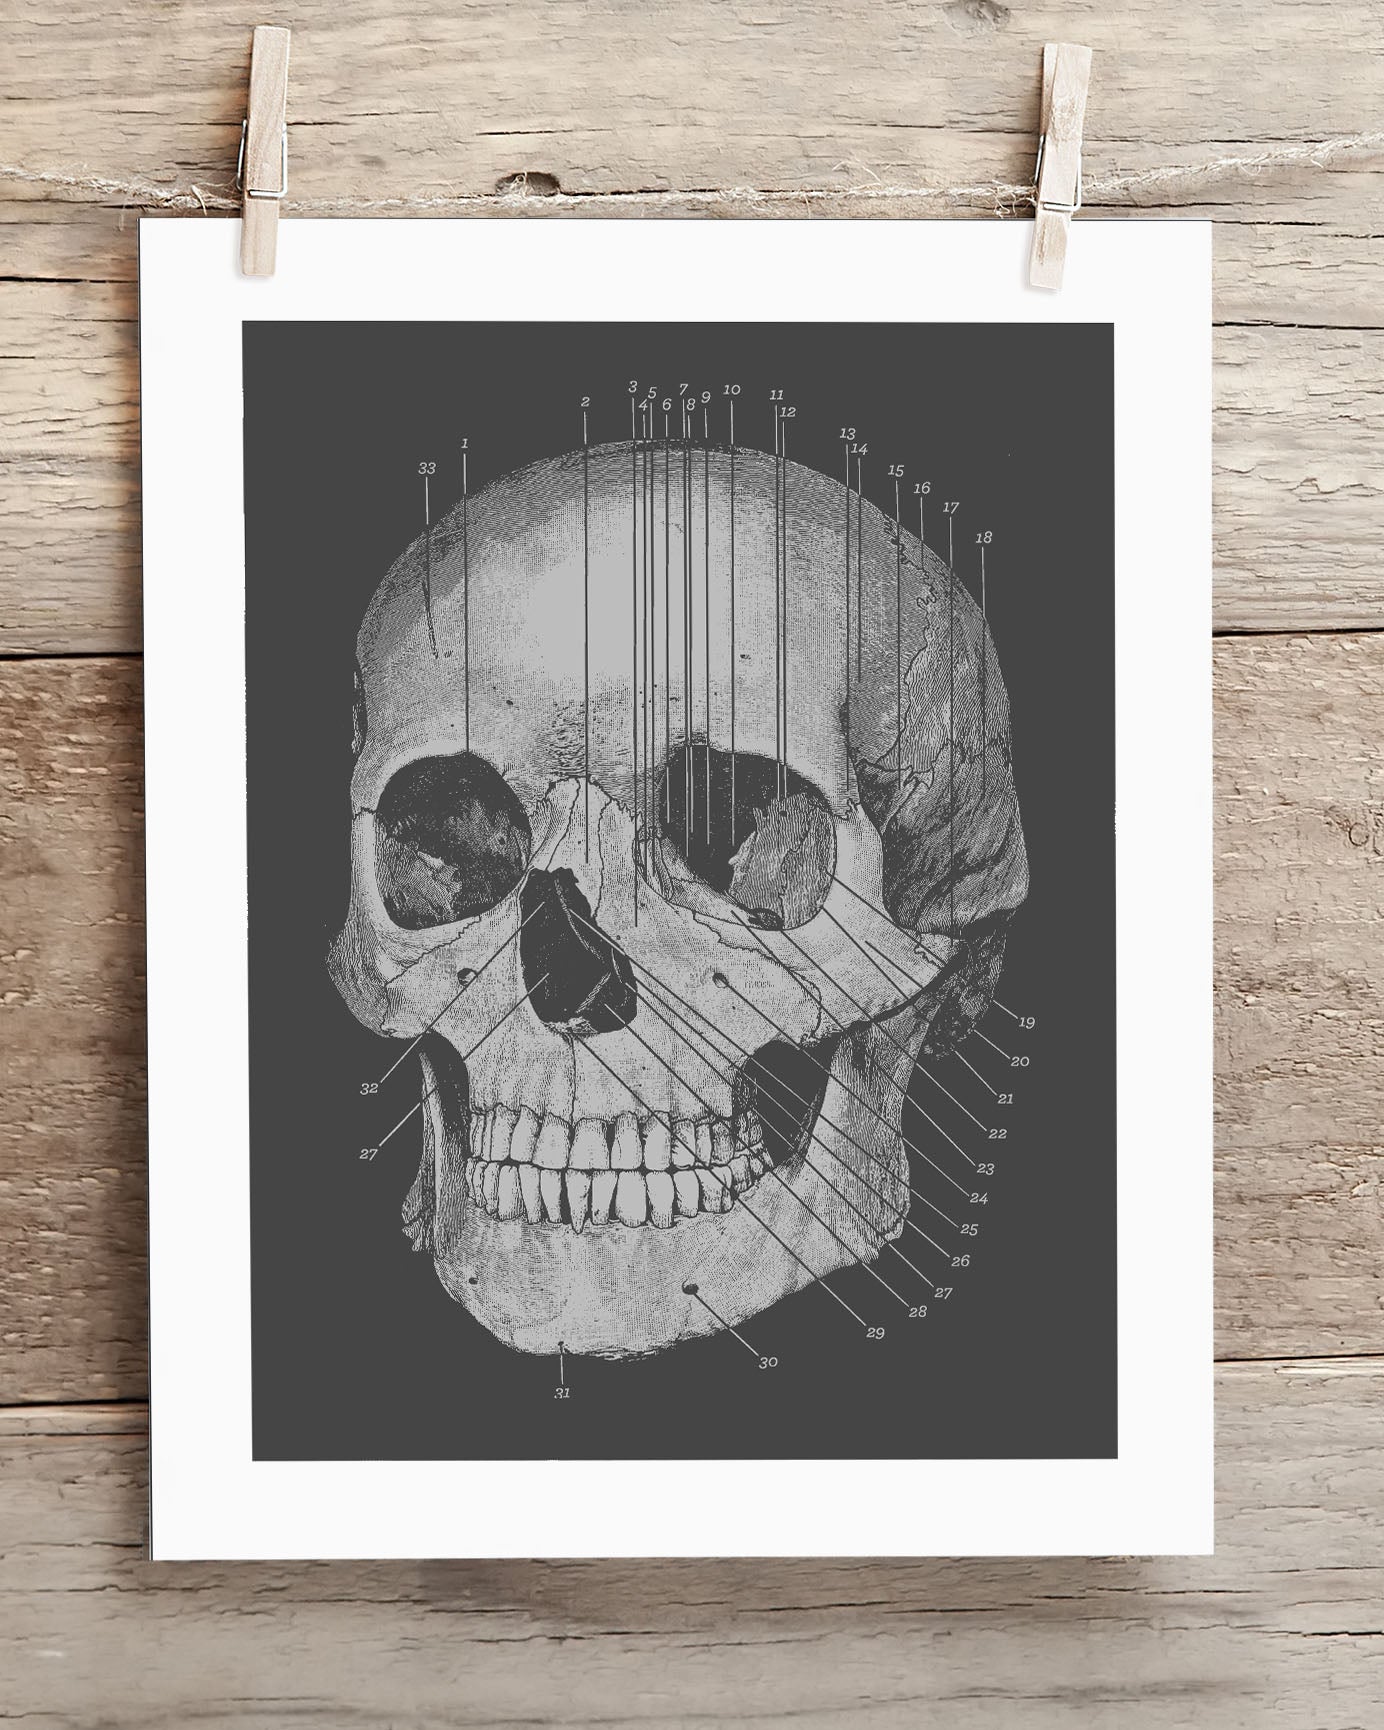 A black and white drawing of a skull hanging on a clothesline.